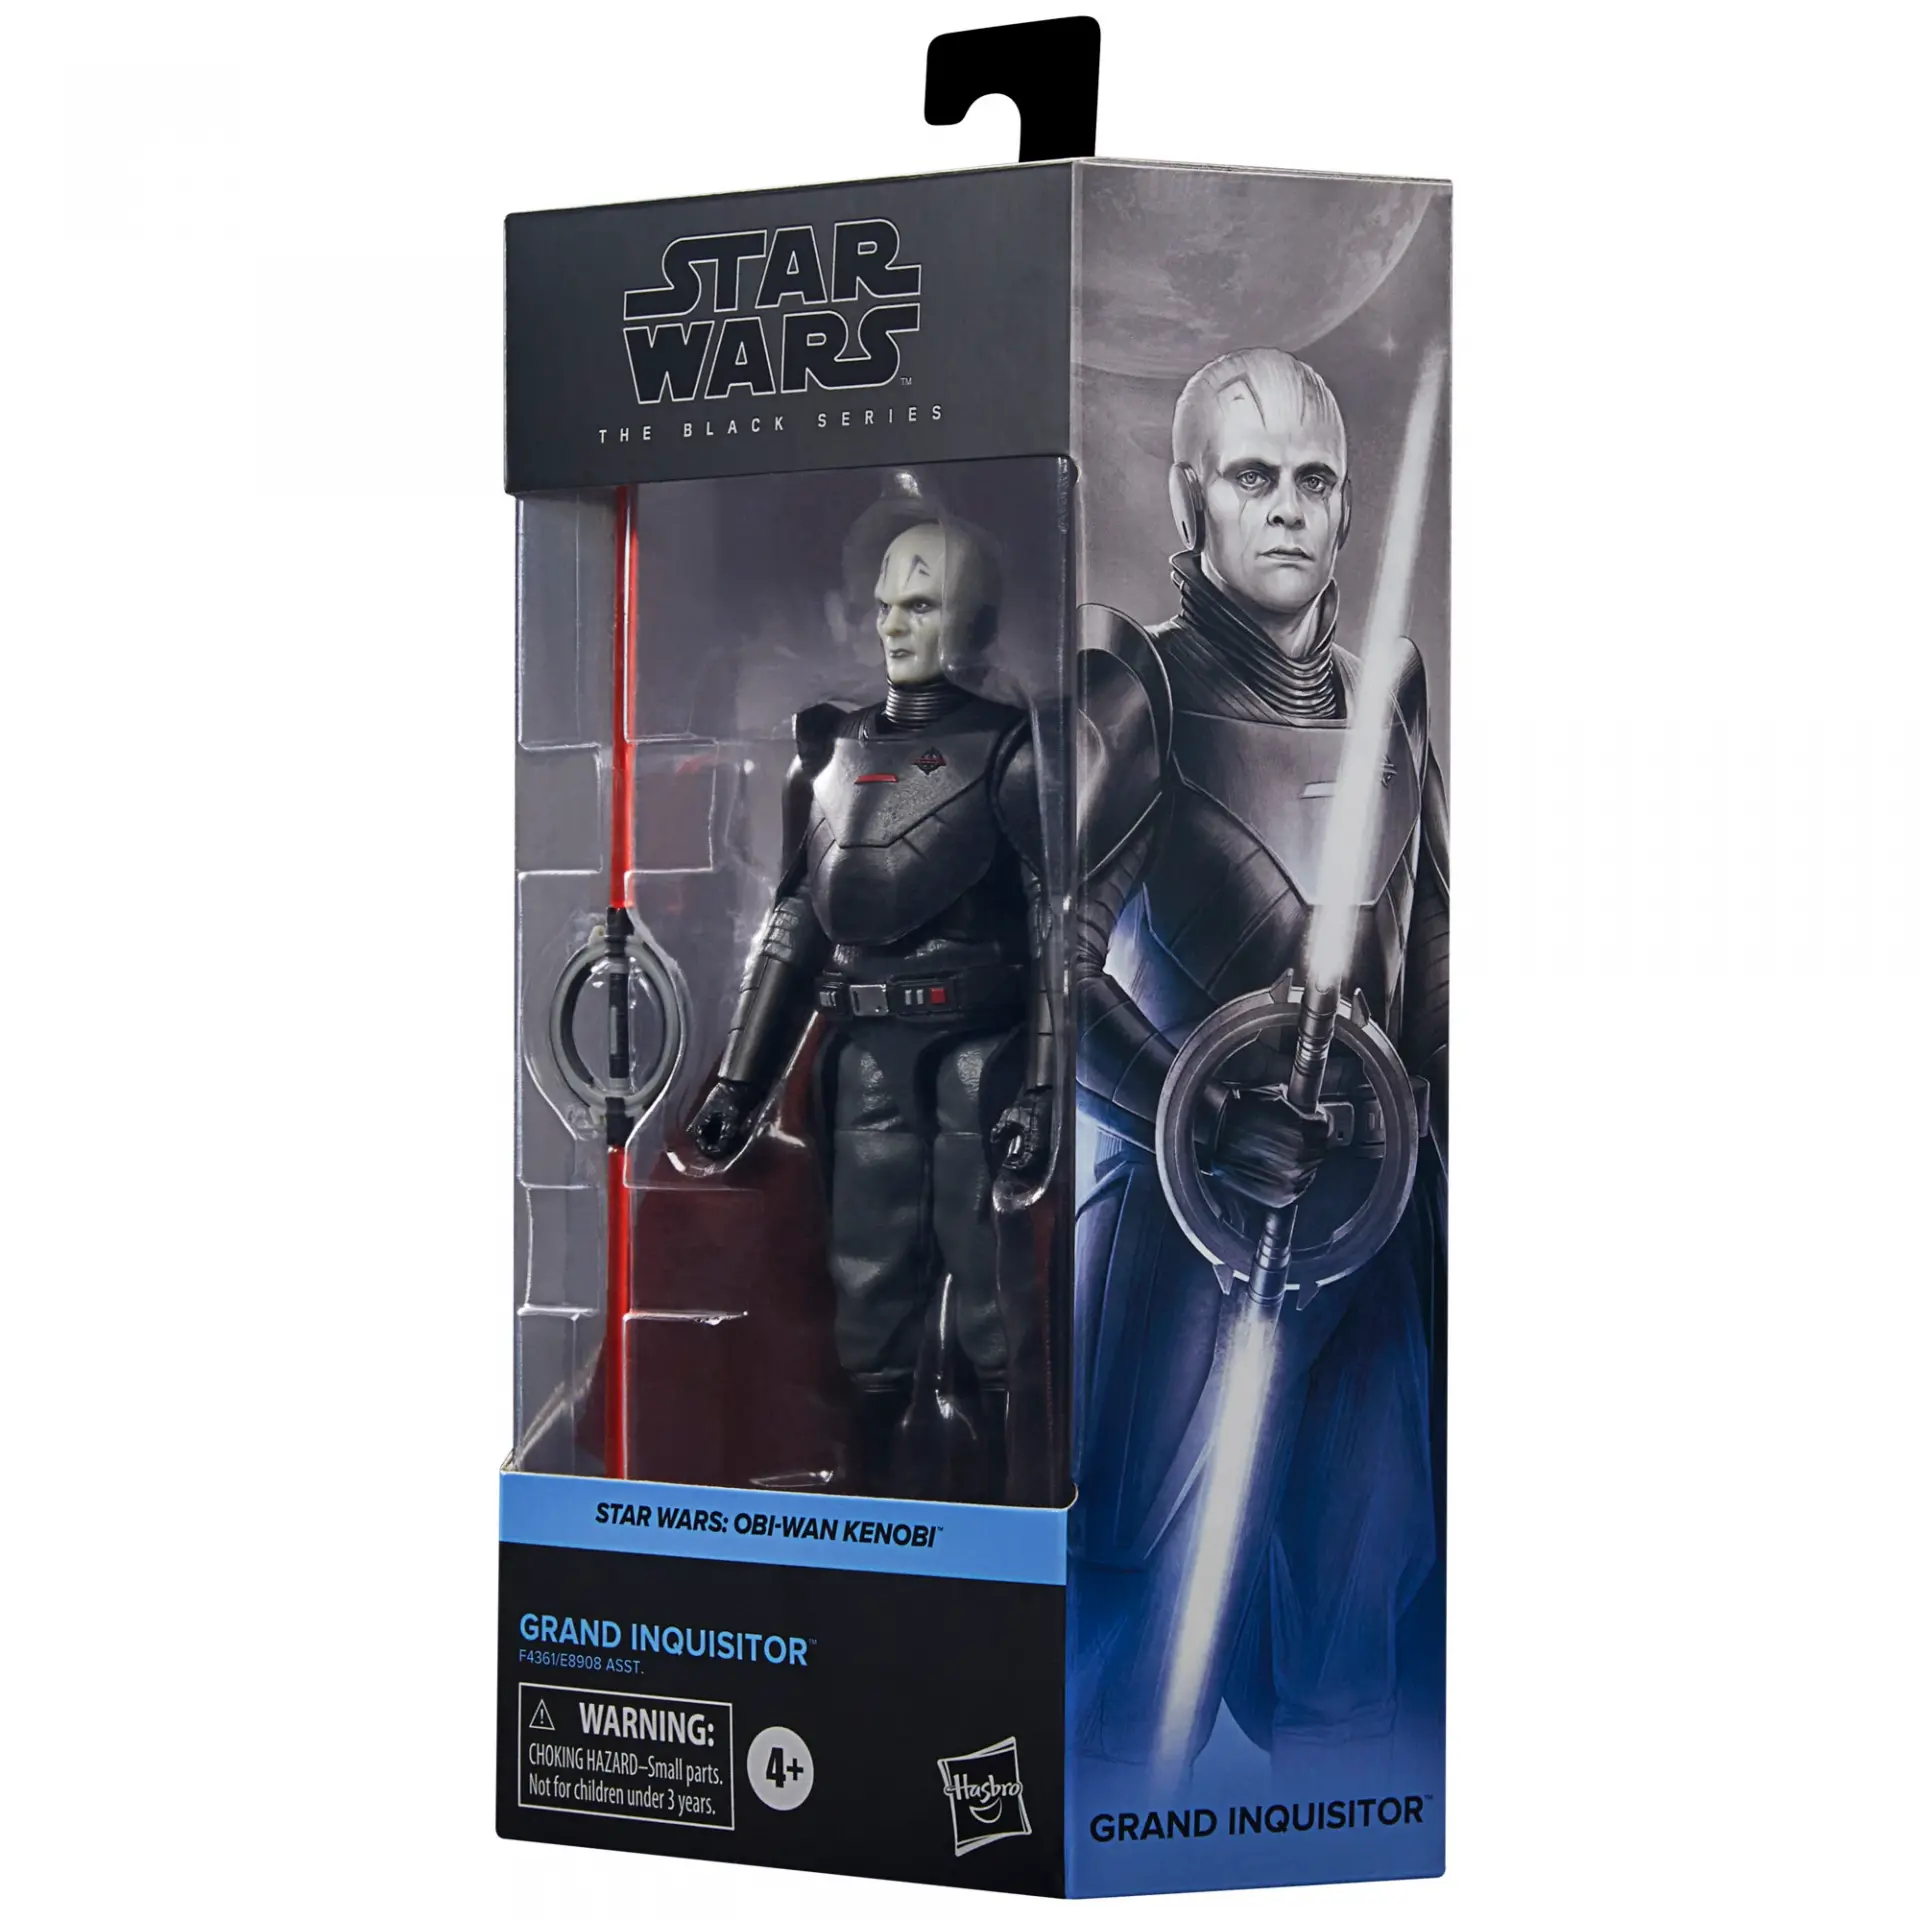 Star wars the black series grand inquisitor jawascave 9